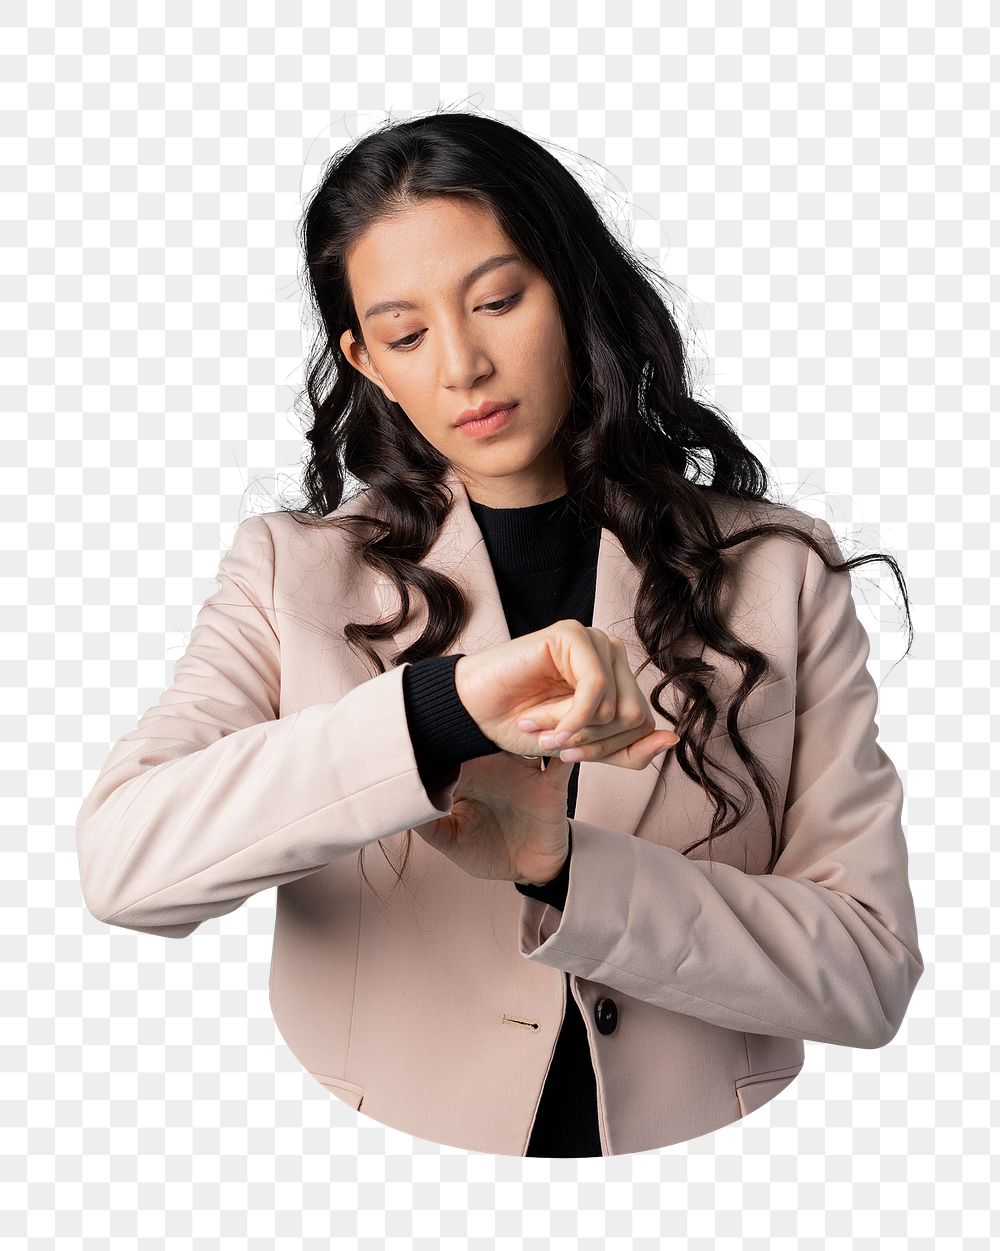 Punctuality png sticker, businesswoman transparent background